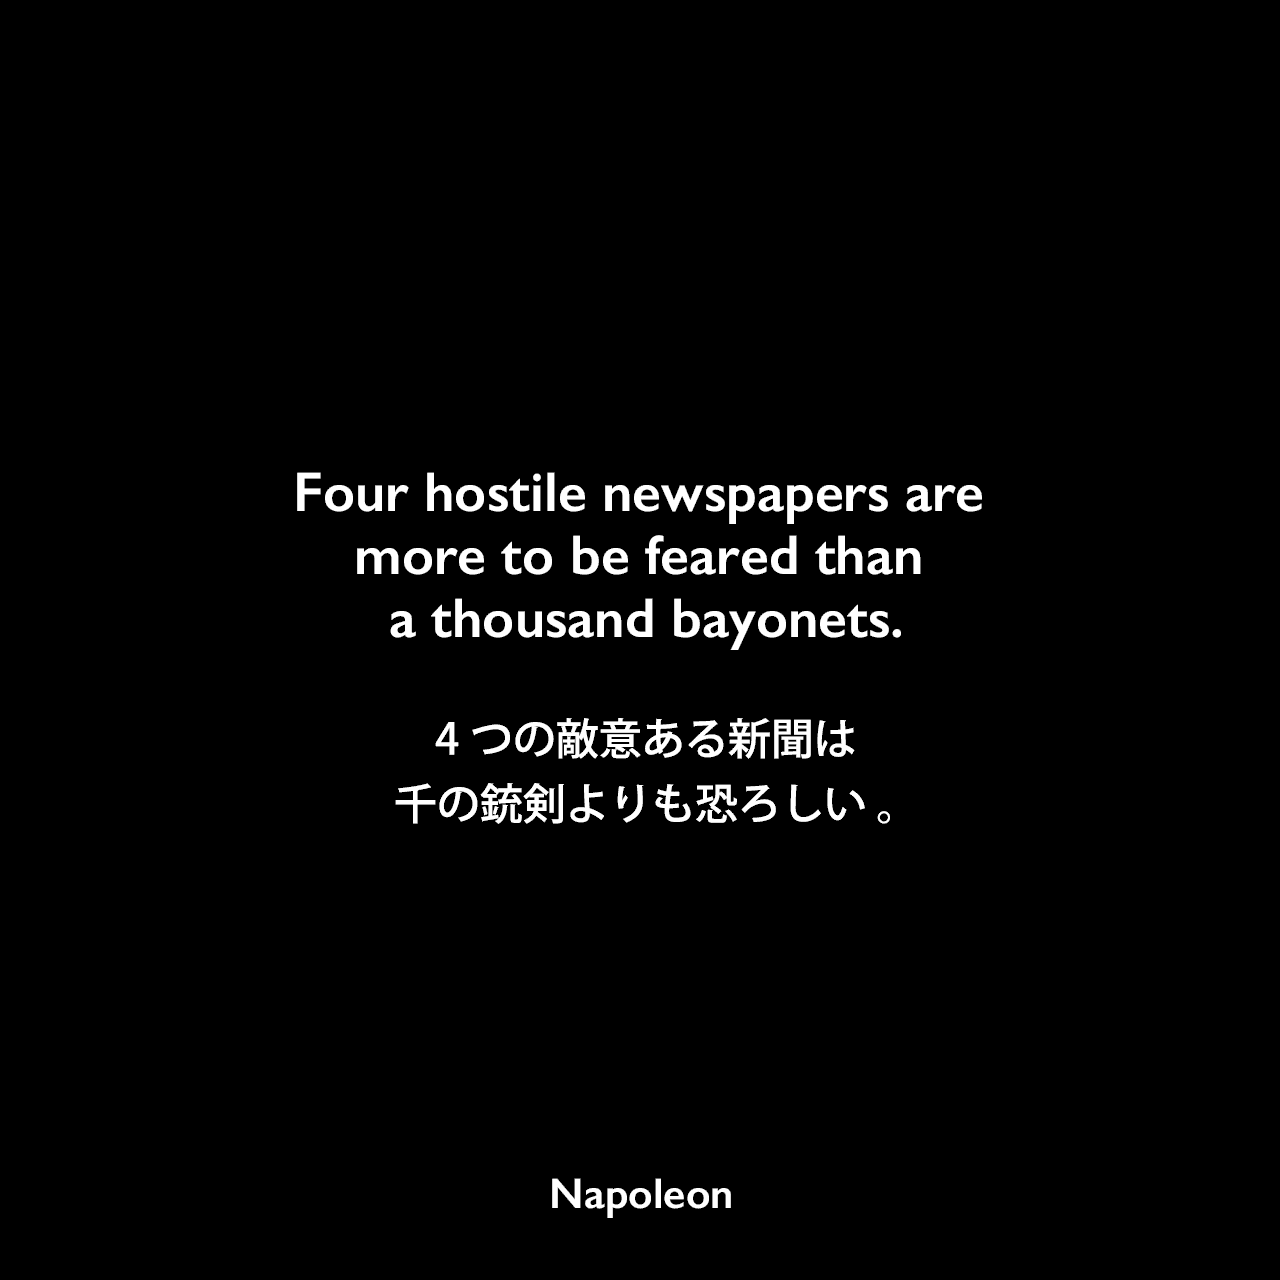 Four hostile newspapers are more to be feared than a thousand bayonets.4つの敵意ある新聞は、千の銃剣よりも恐ろしい 。Napoleon